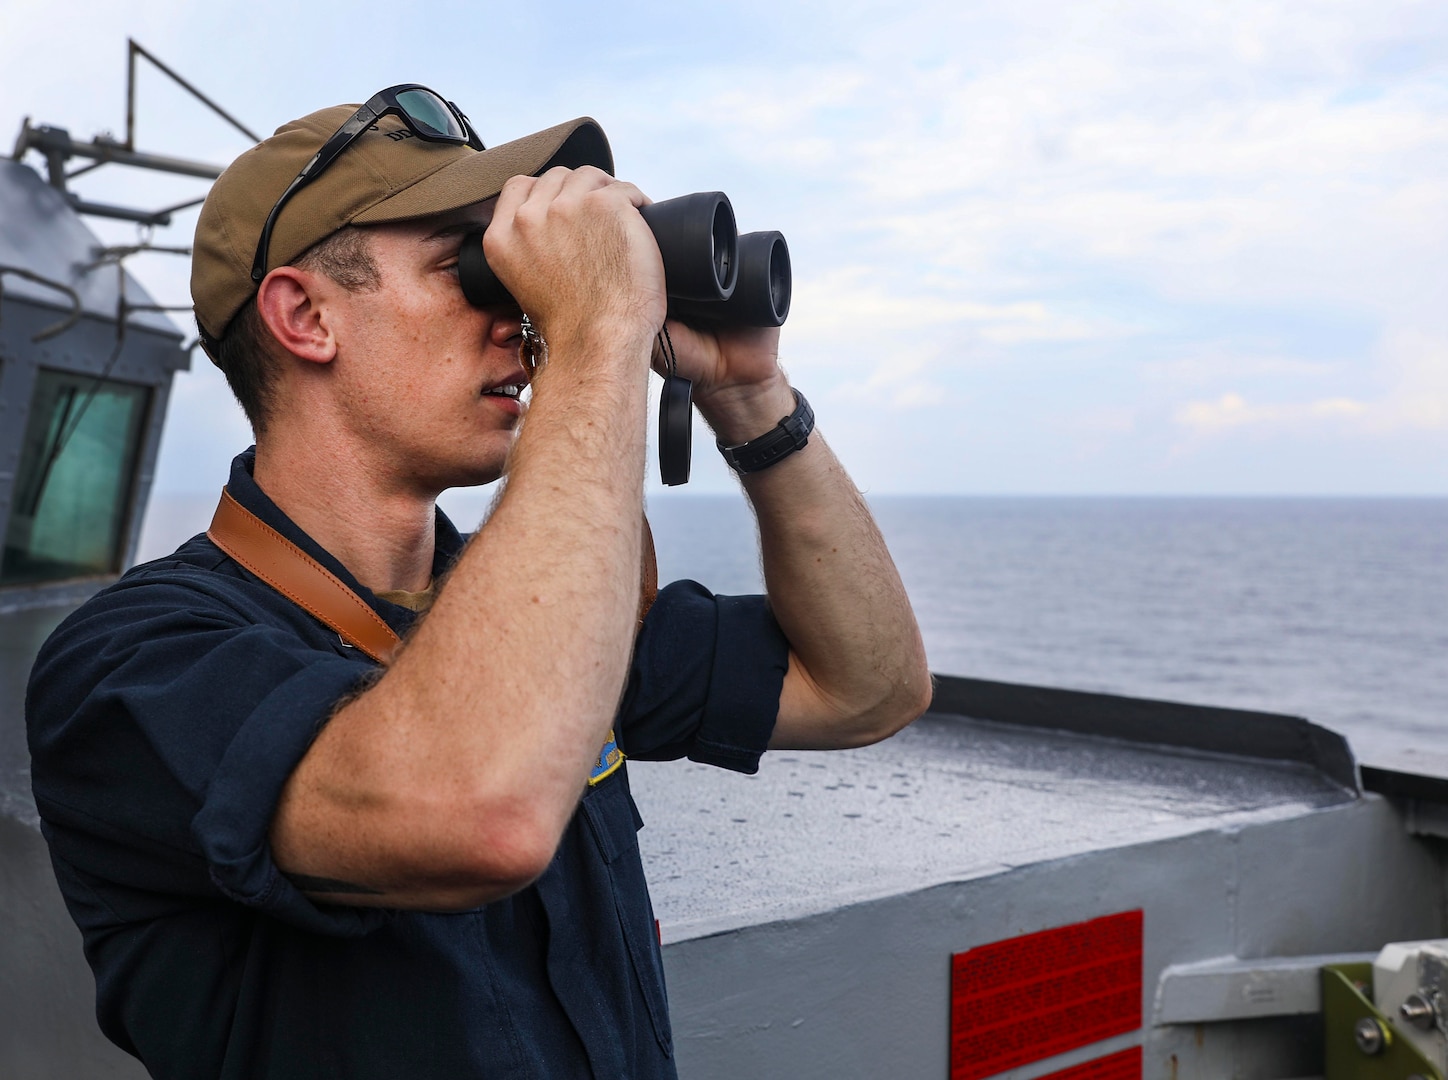 SOUTH CHINA SEA (July 12, 2021) Lt.j.g. Andrew Hayne, from Parker, Colo., uses binoculars to monitor a surface contact from the bridge wing of the Arleigh Burke-class guided-missile destroyer USS Benfold (DDG 65) while conducting routine underway operations. Benfold is forward-deployed to the U.S. 7th Fleet